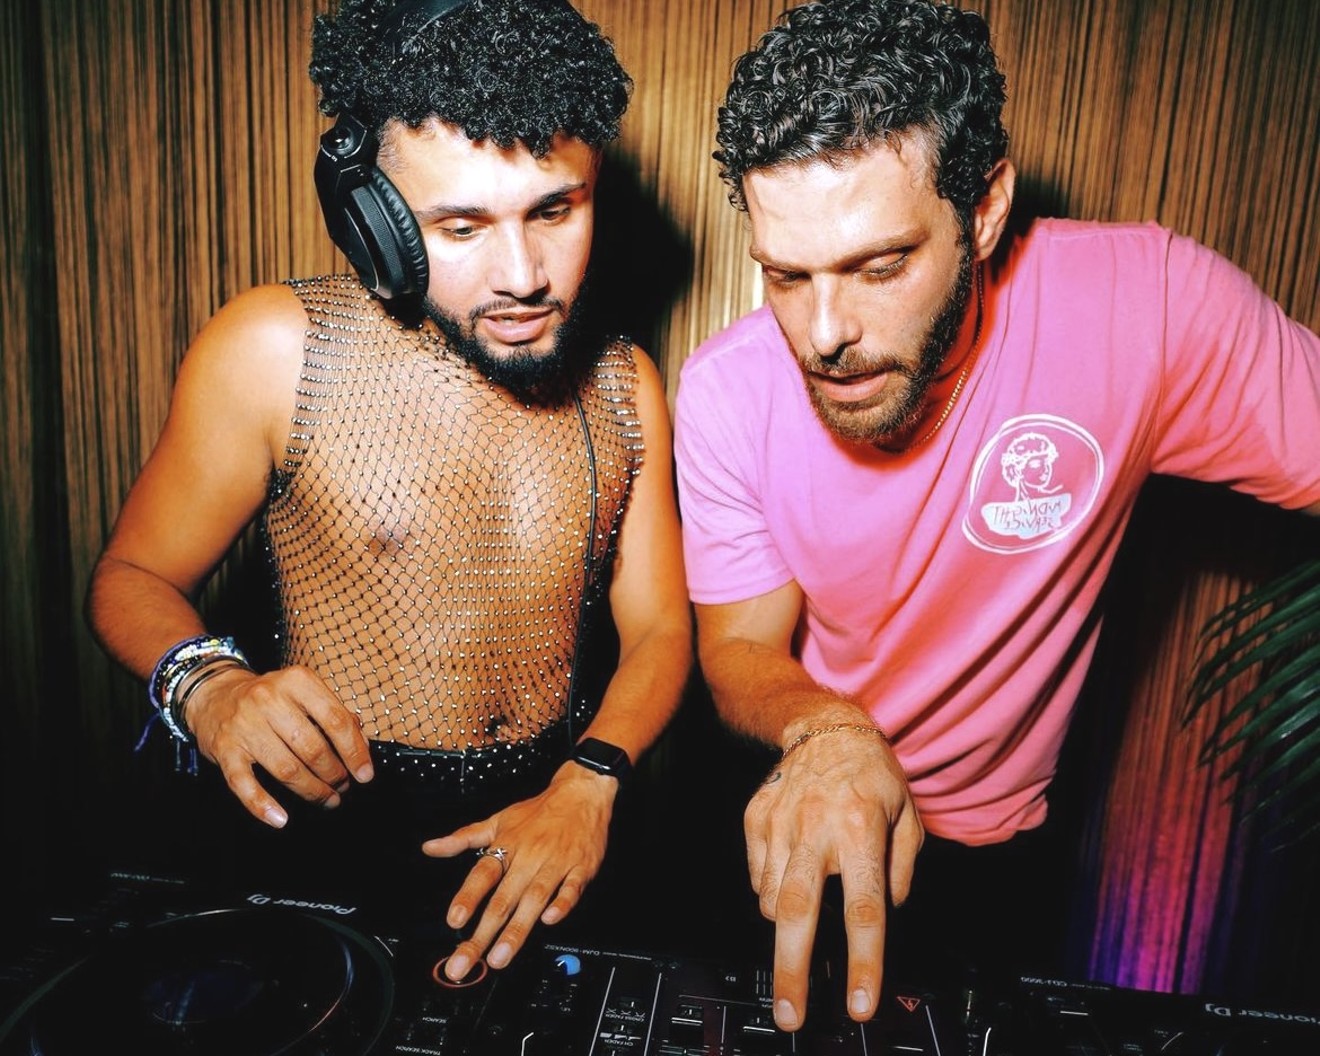 Miguel Clark (left) and Naim Zarzour are the cofounders of Midnight Service, a monthly queer party in Miami.